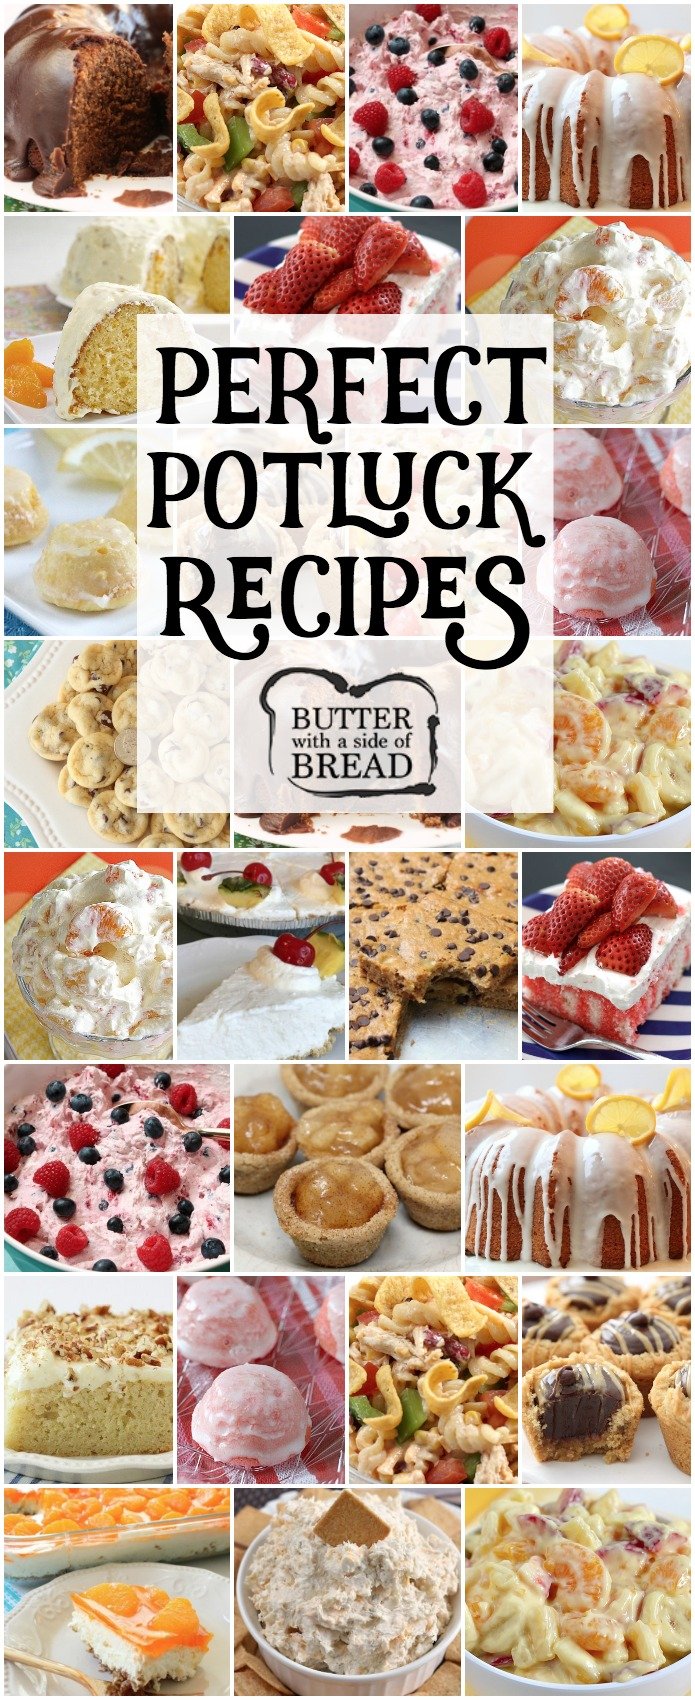 Our favorite POTLUCK RECIPES all in one place! Includes our popular recipes for Fiesta Ranch Chicken Pasta Salad, Lemon Cake Drops, Chocolate Chip Banana Bars, Orange Cream Fruit Salad and more. Perfect recipes for planning your next #potluck dinner or lunch. Recipes from Butter With A Side of Bread #food #recipe #potlucks #potluck #lunch #summer